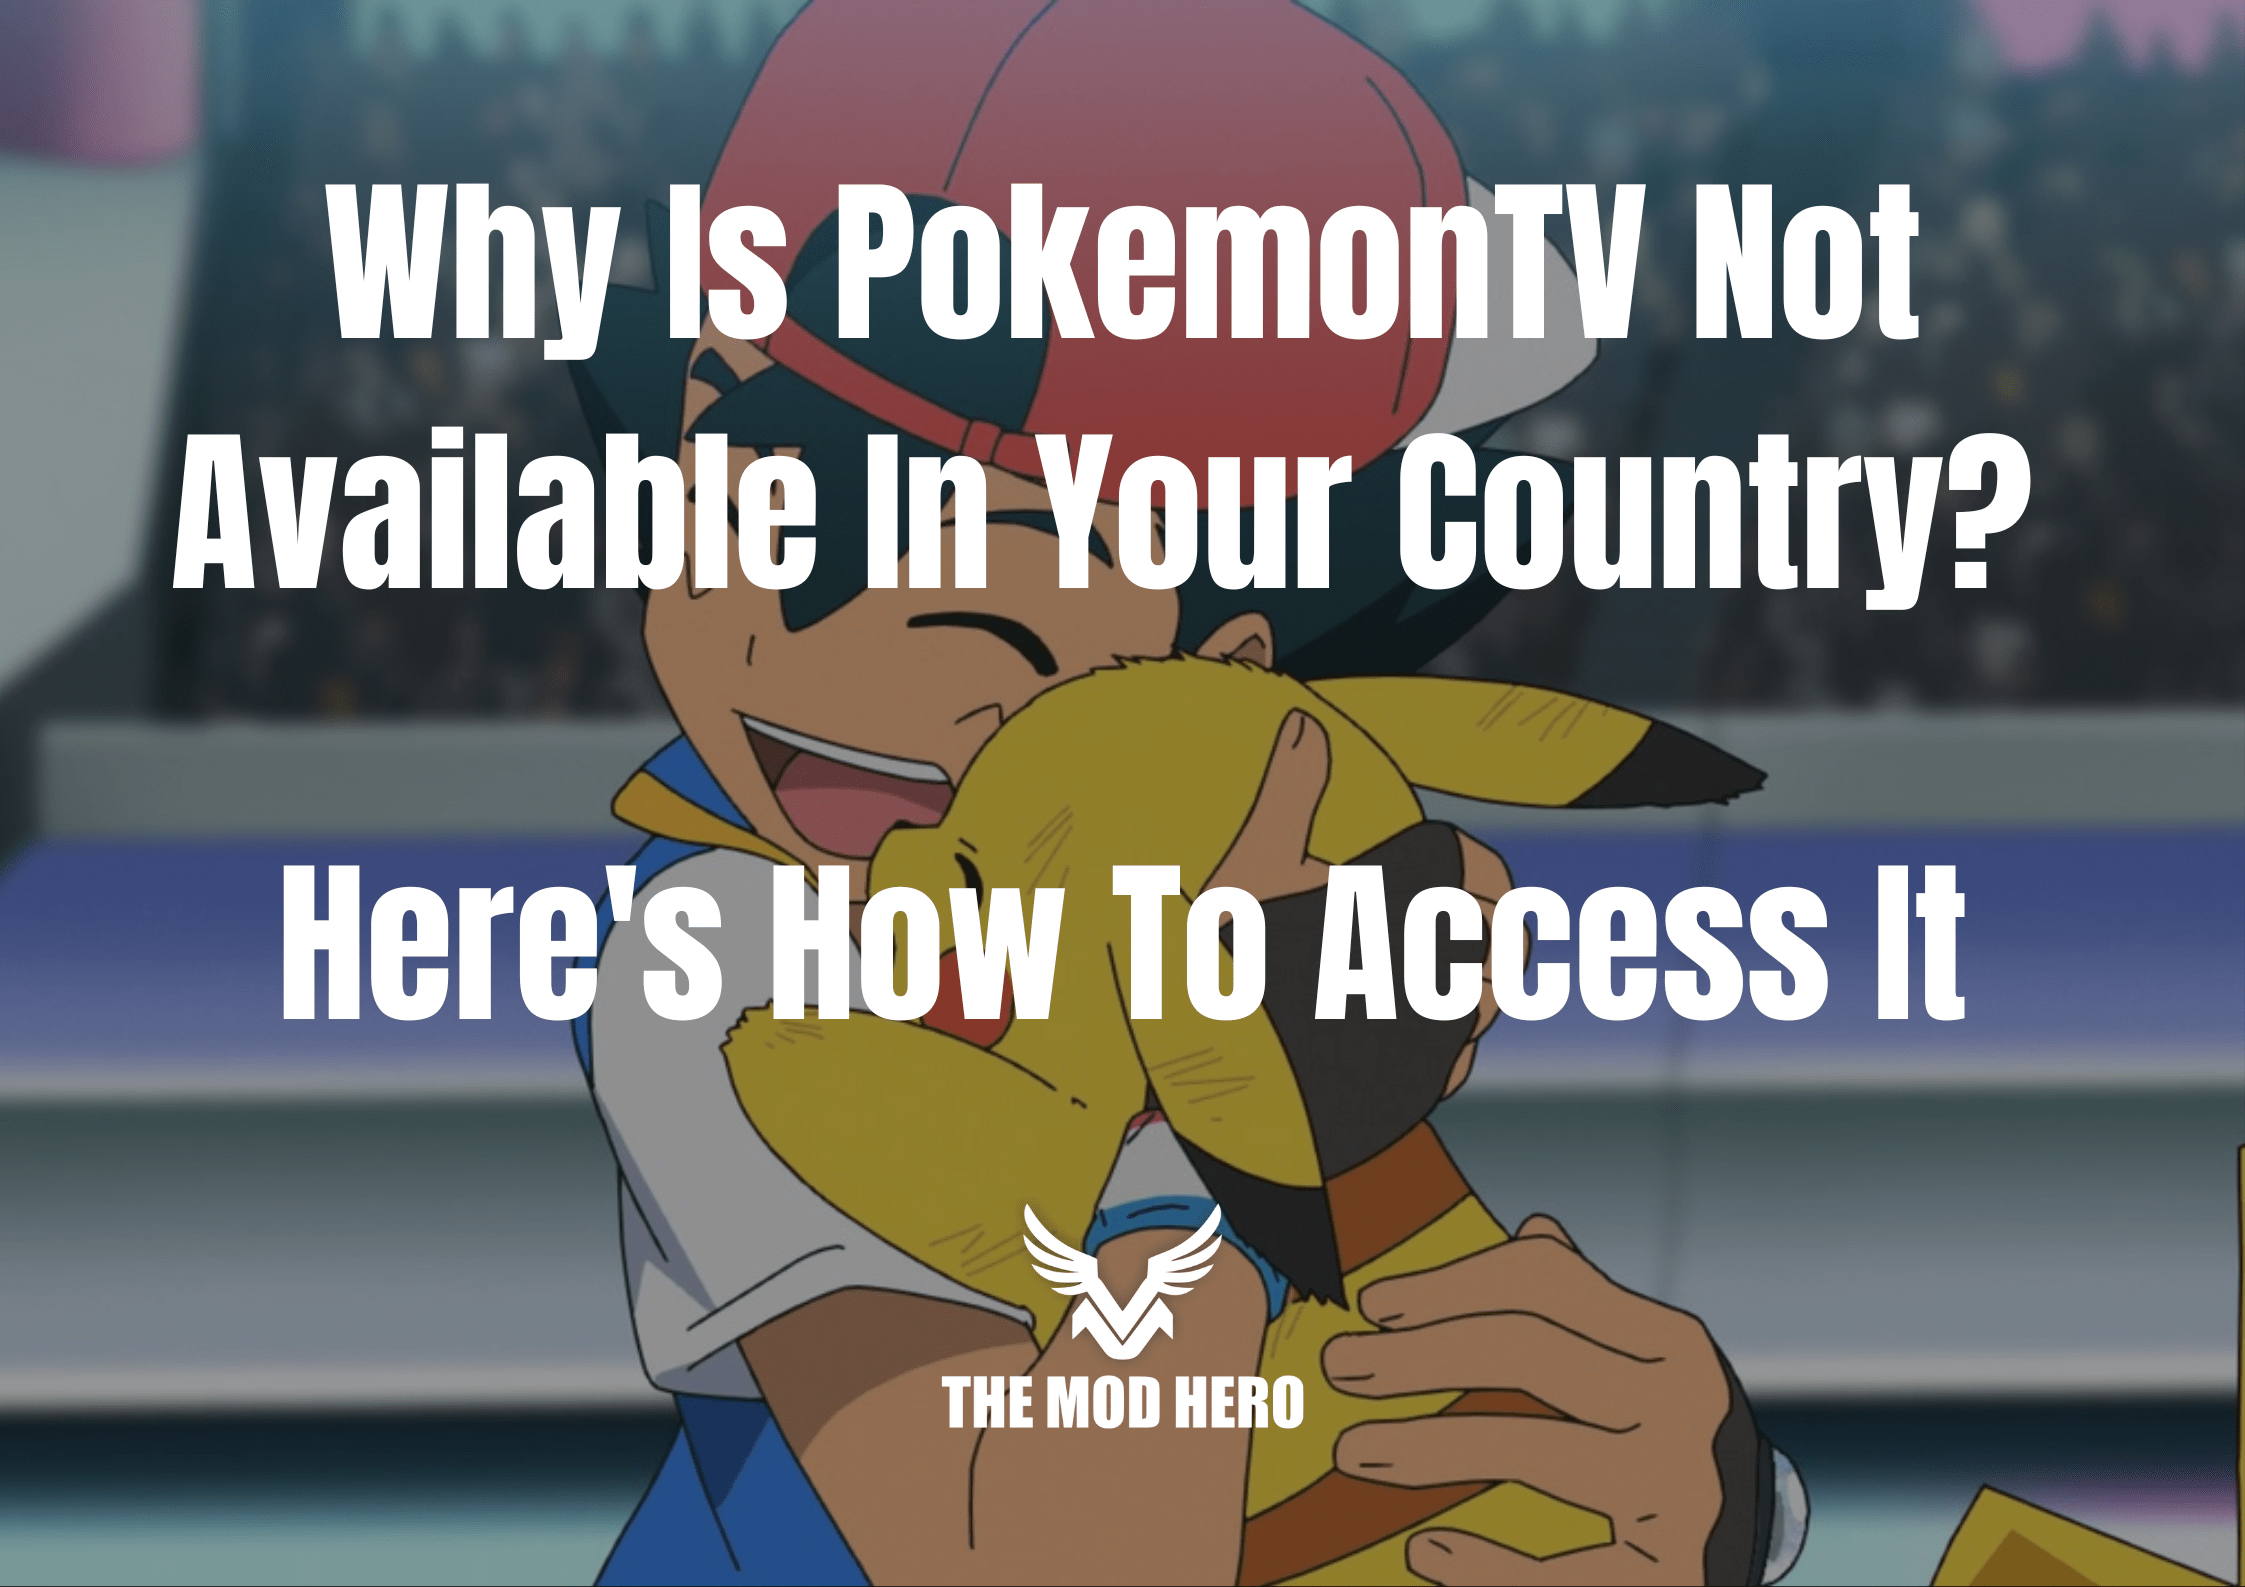 PokemonTV Not Available In Your Country